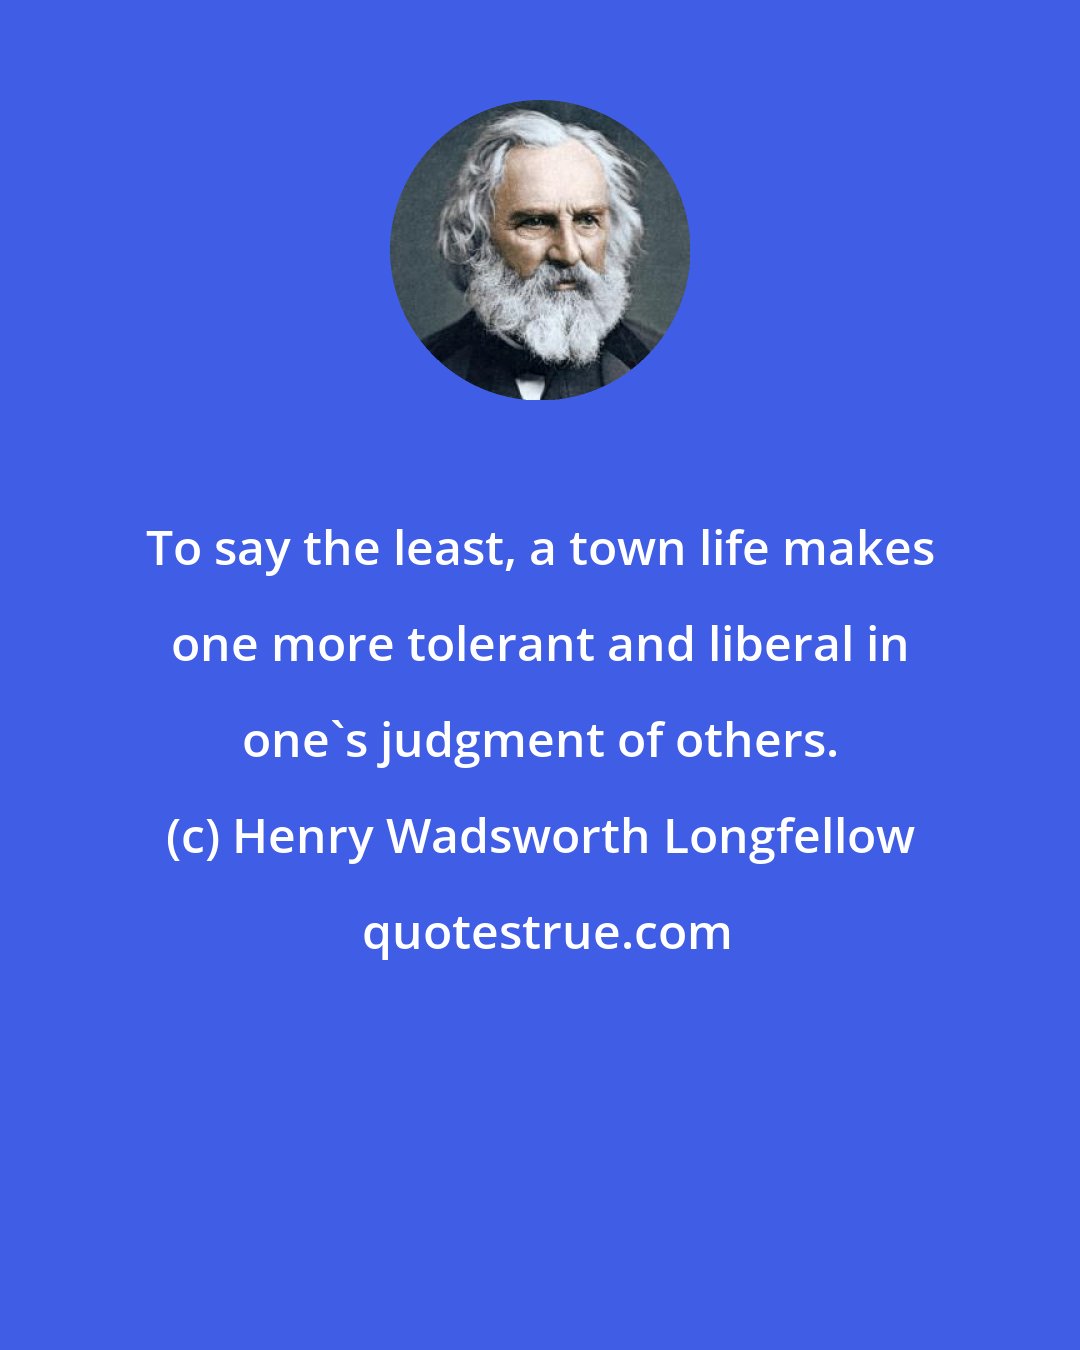 Henry Wadsworth Longfellow: To say the least, a town life makes one more tolerant and liberal in one's judgment of others.